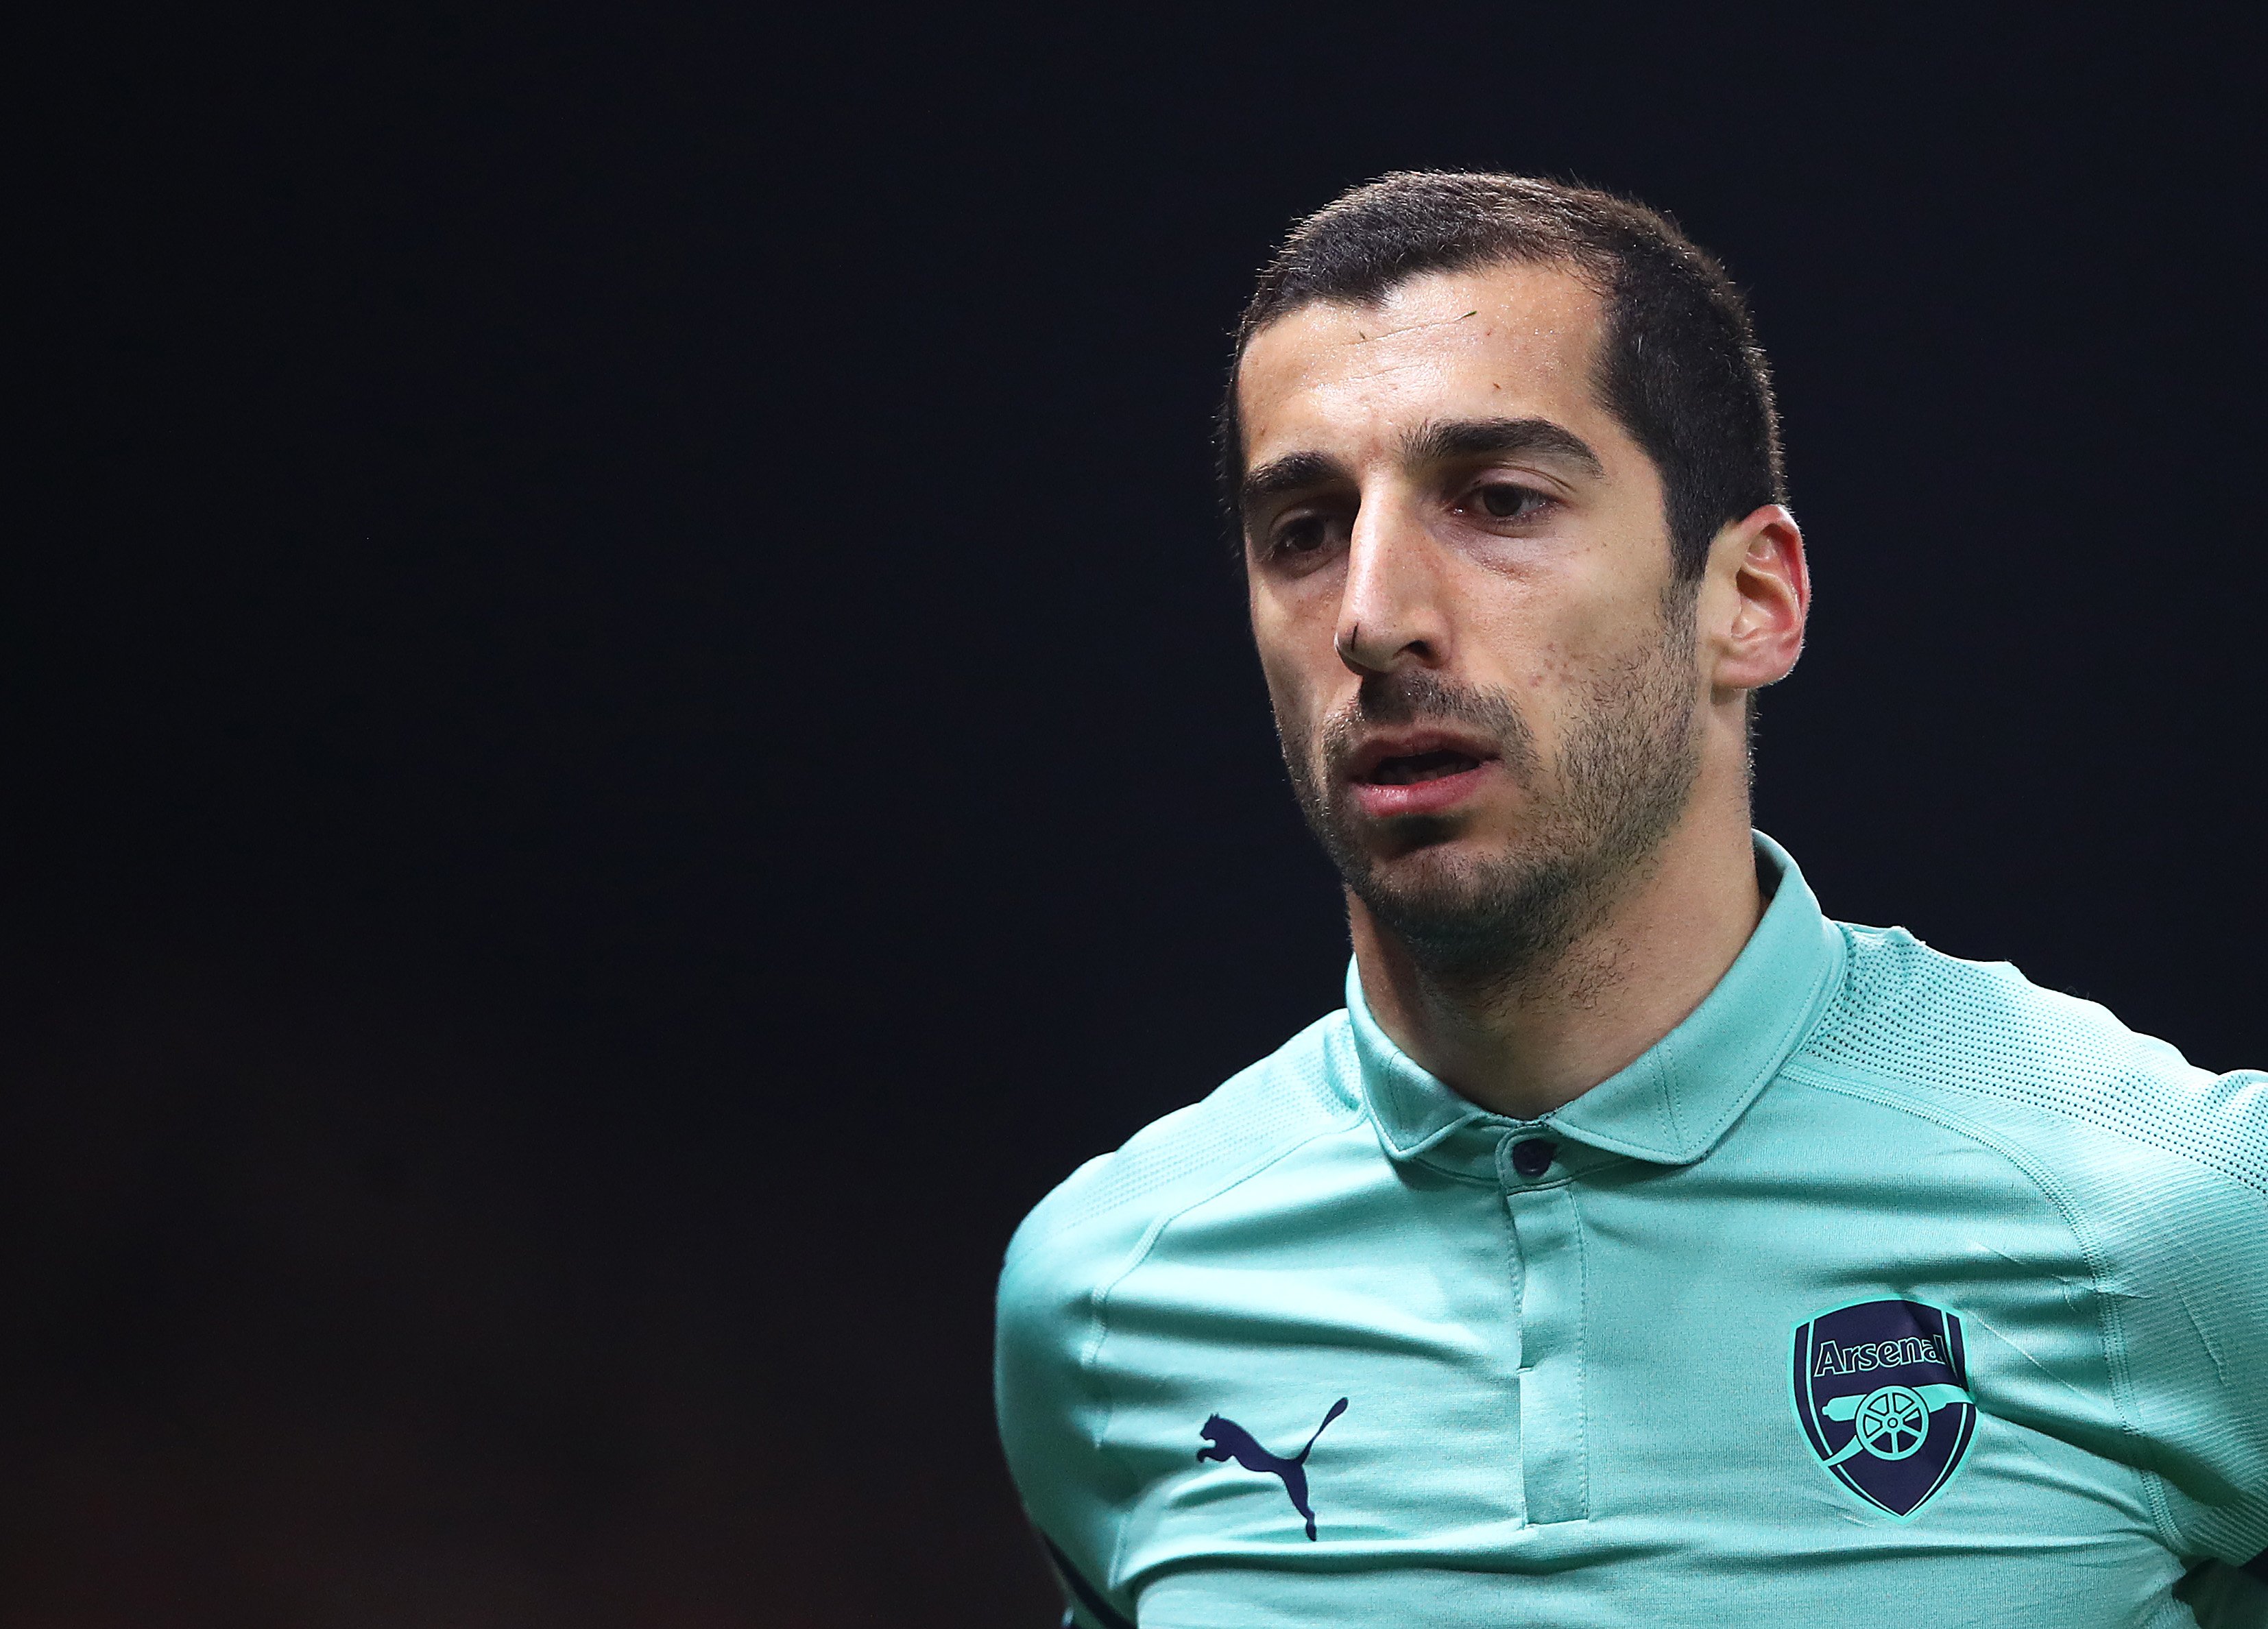 UEFA hit back at Arsenal over decision to leave Mkhitaryan out of their EL final squad